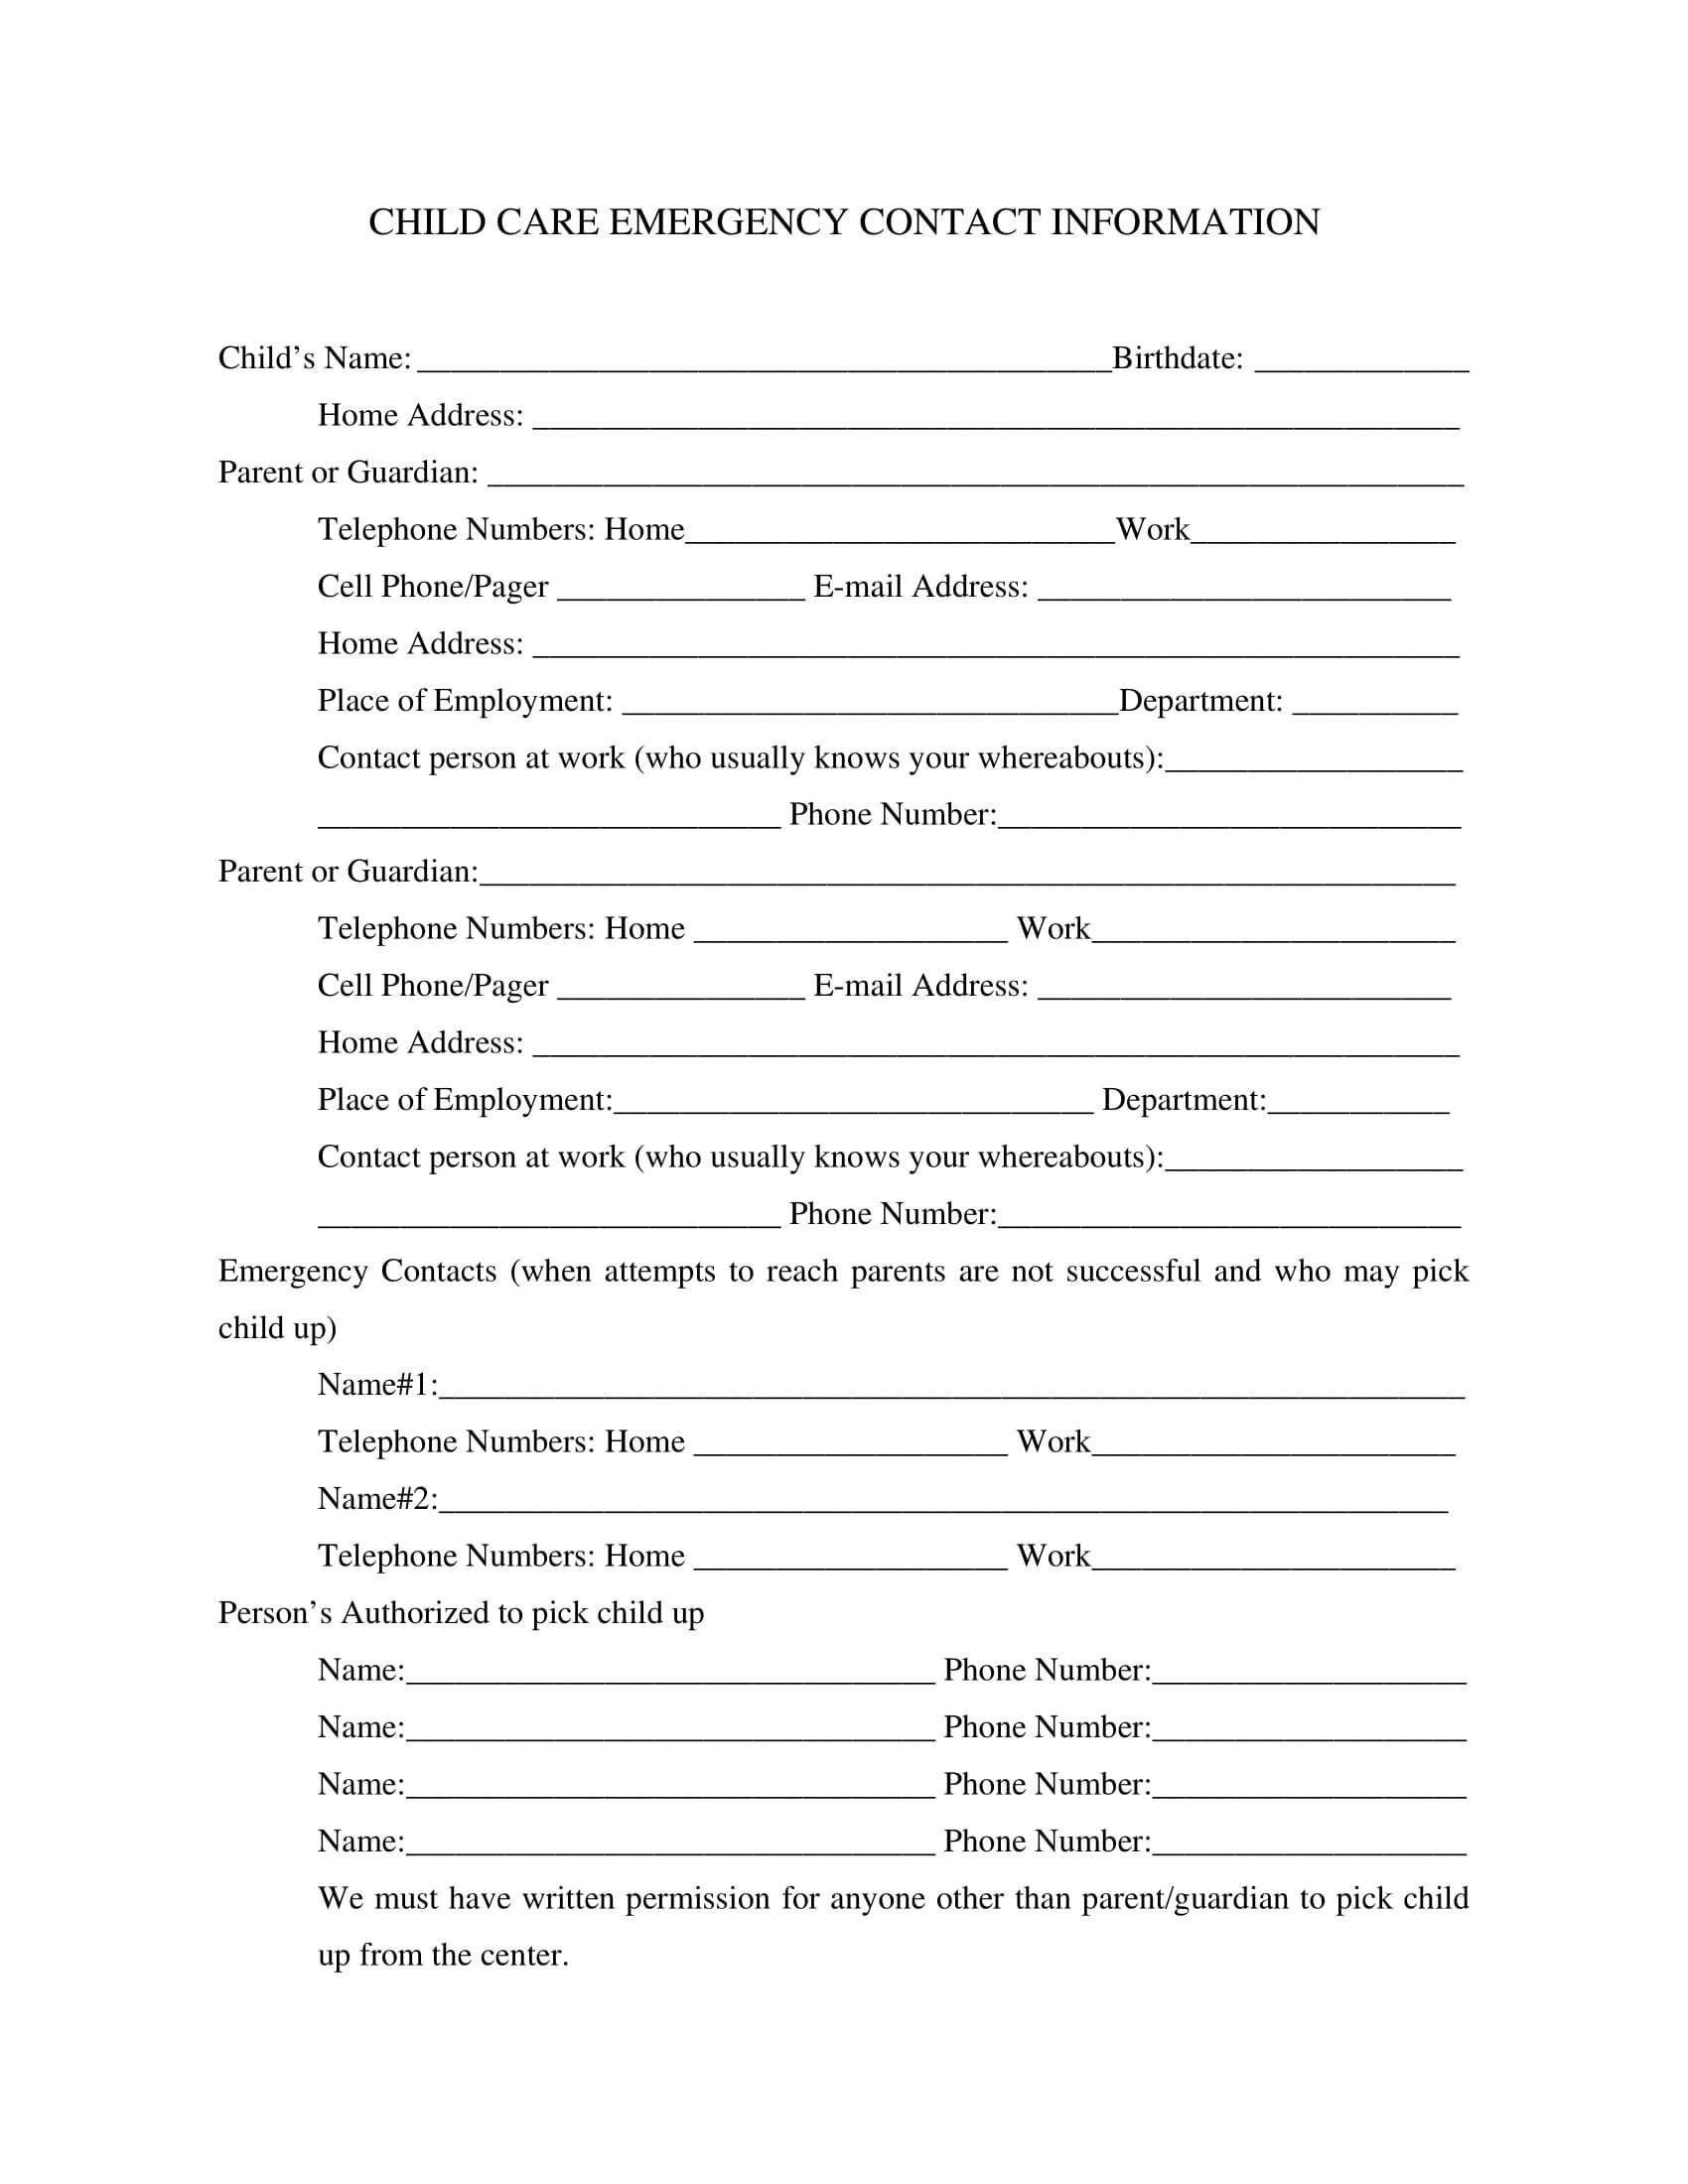 Emergency Contact Information form 10 Emergency Information form Examples Pdf